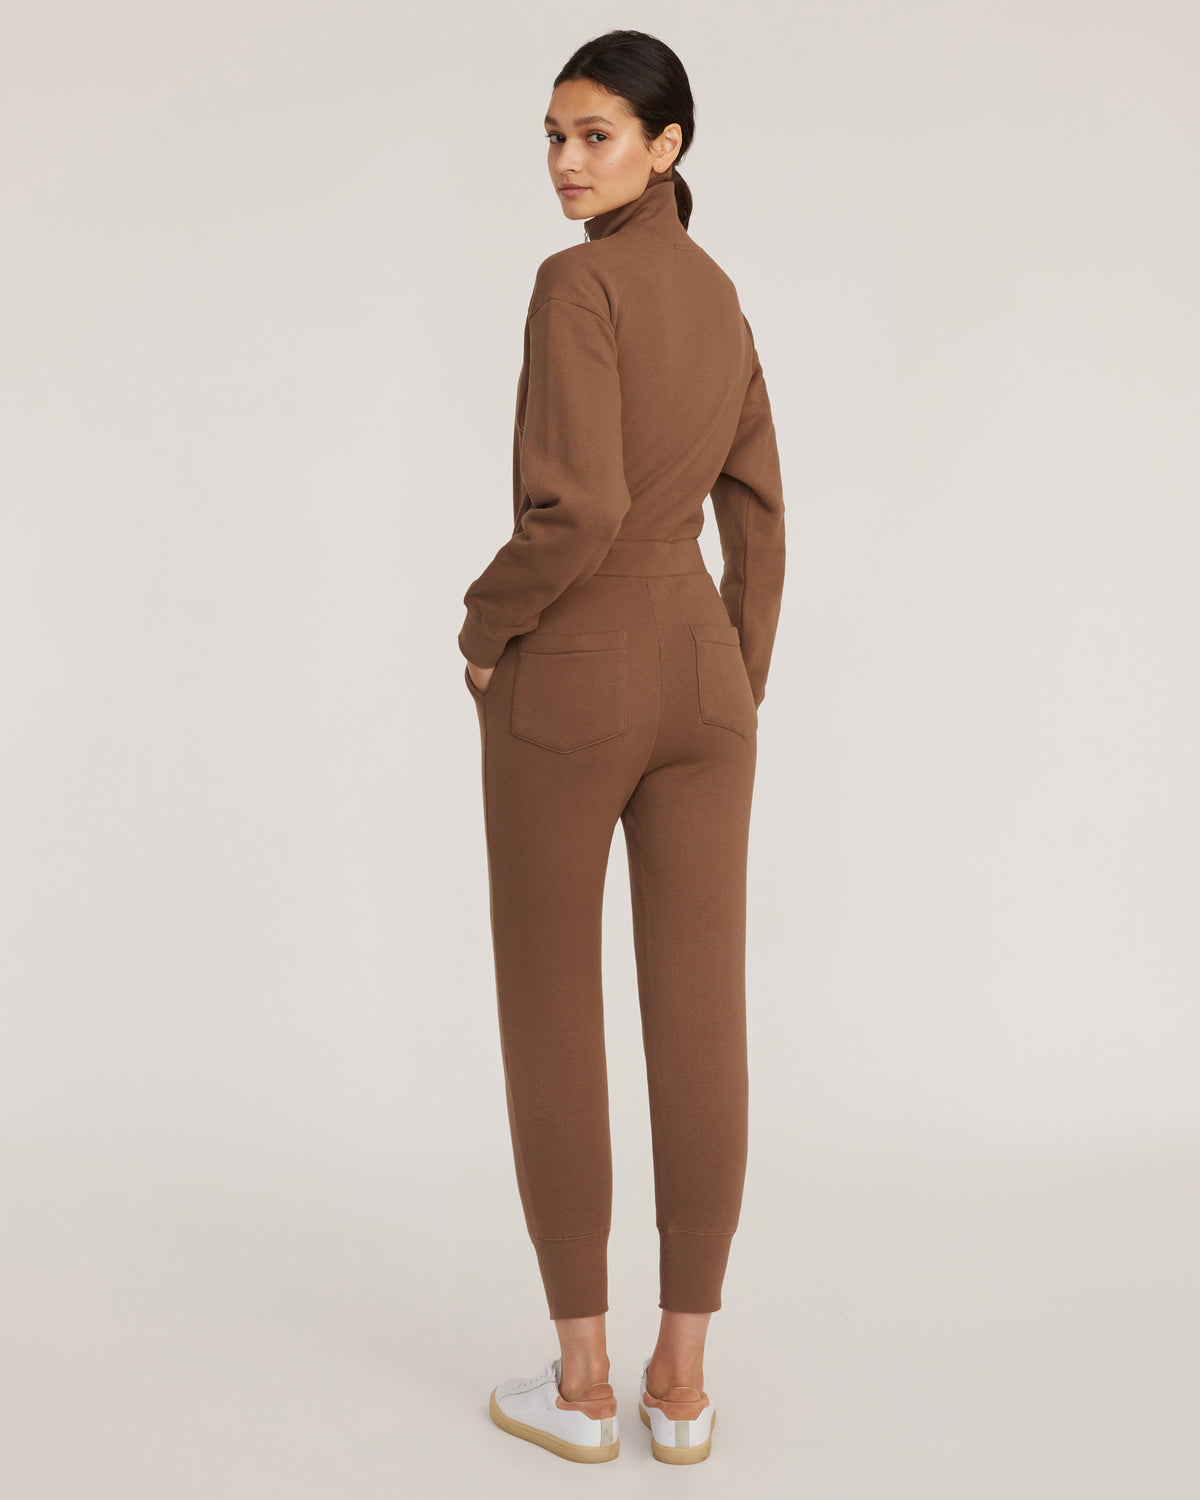 Red-Eye Zip Front French Terry Jumpsuit in Cognac